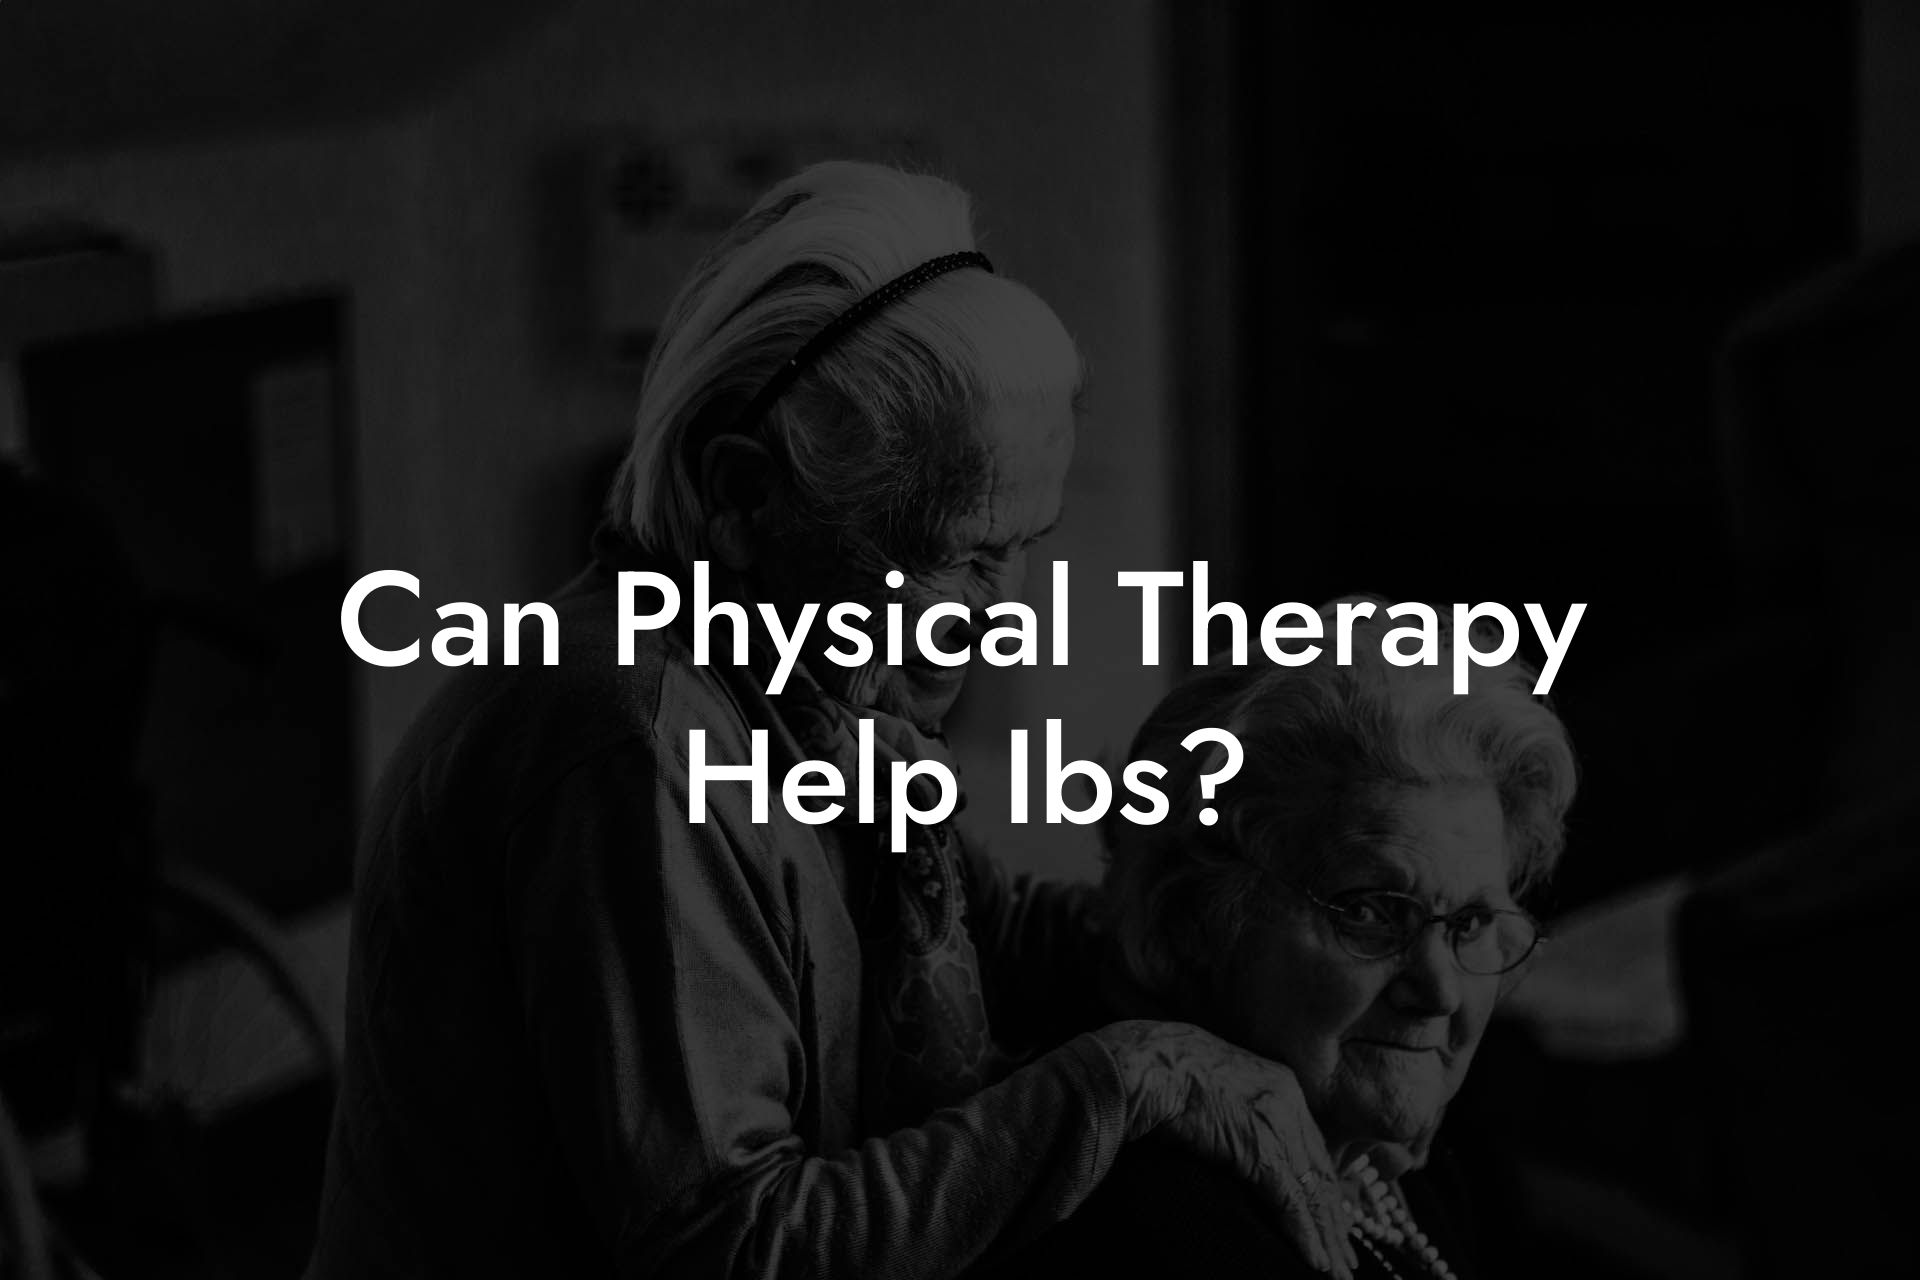 Can Physical Therapy Help Ibs?